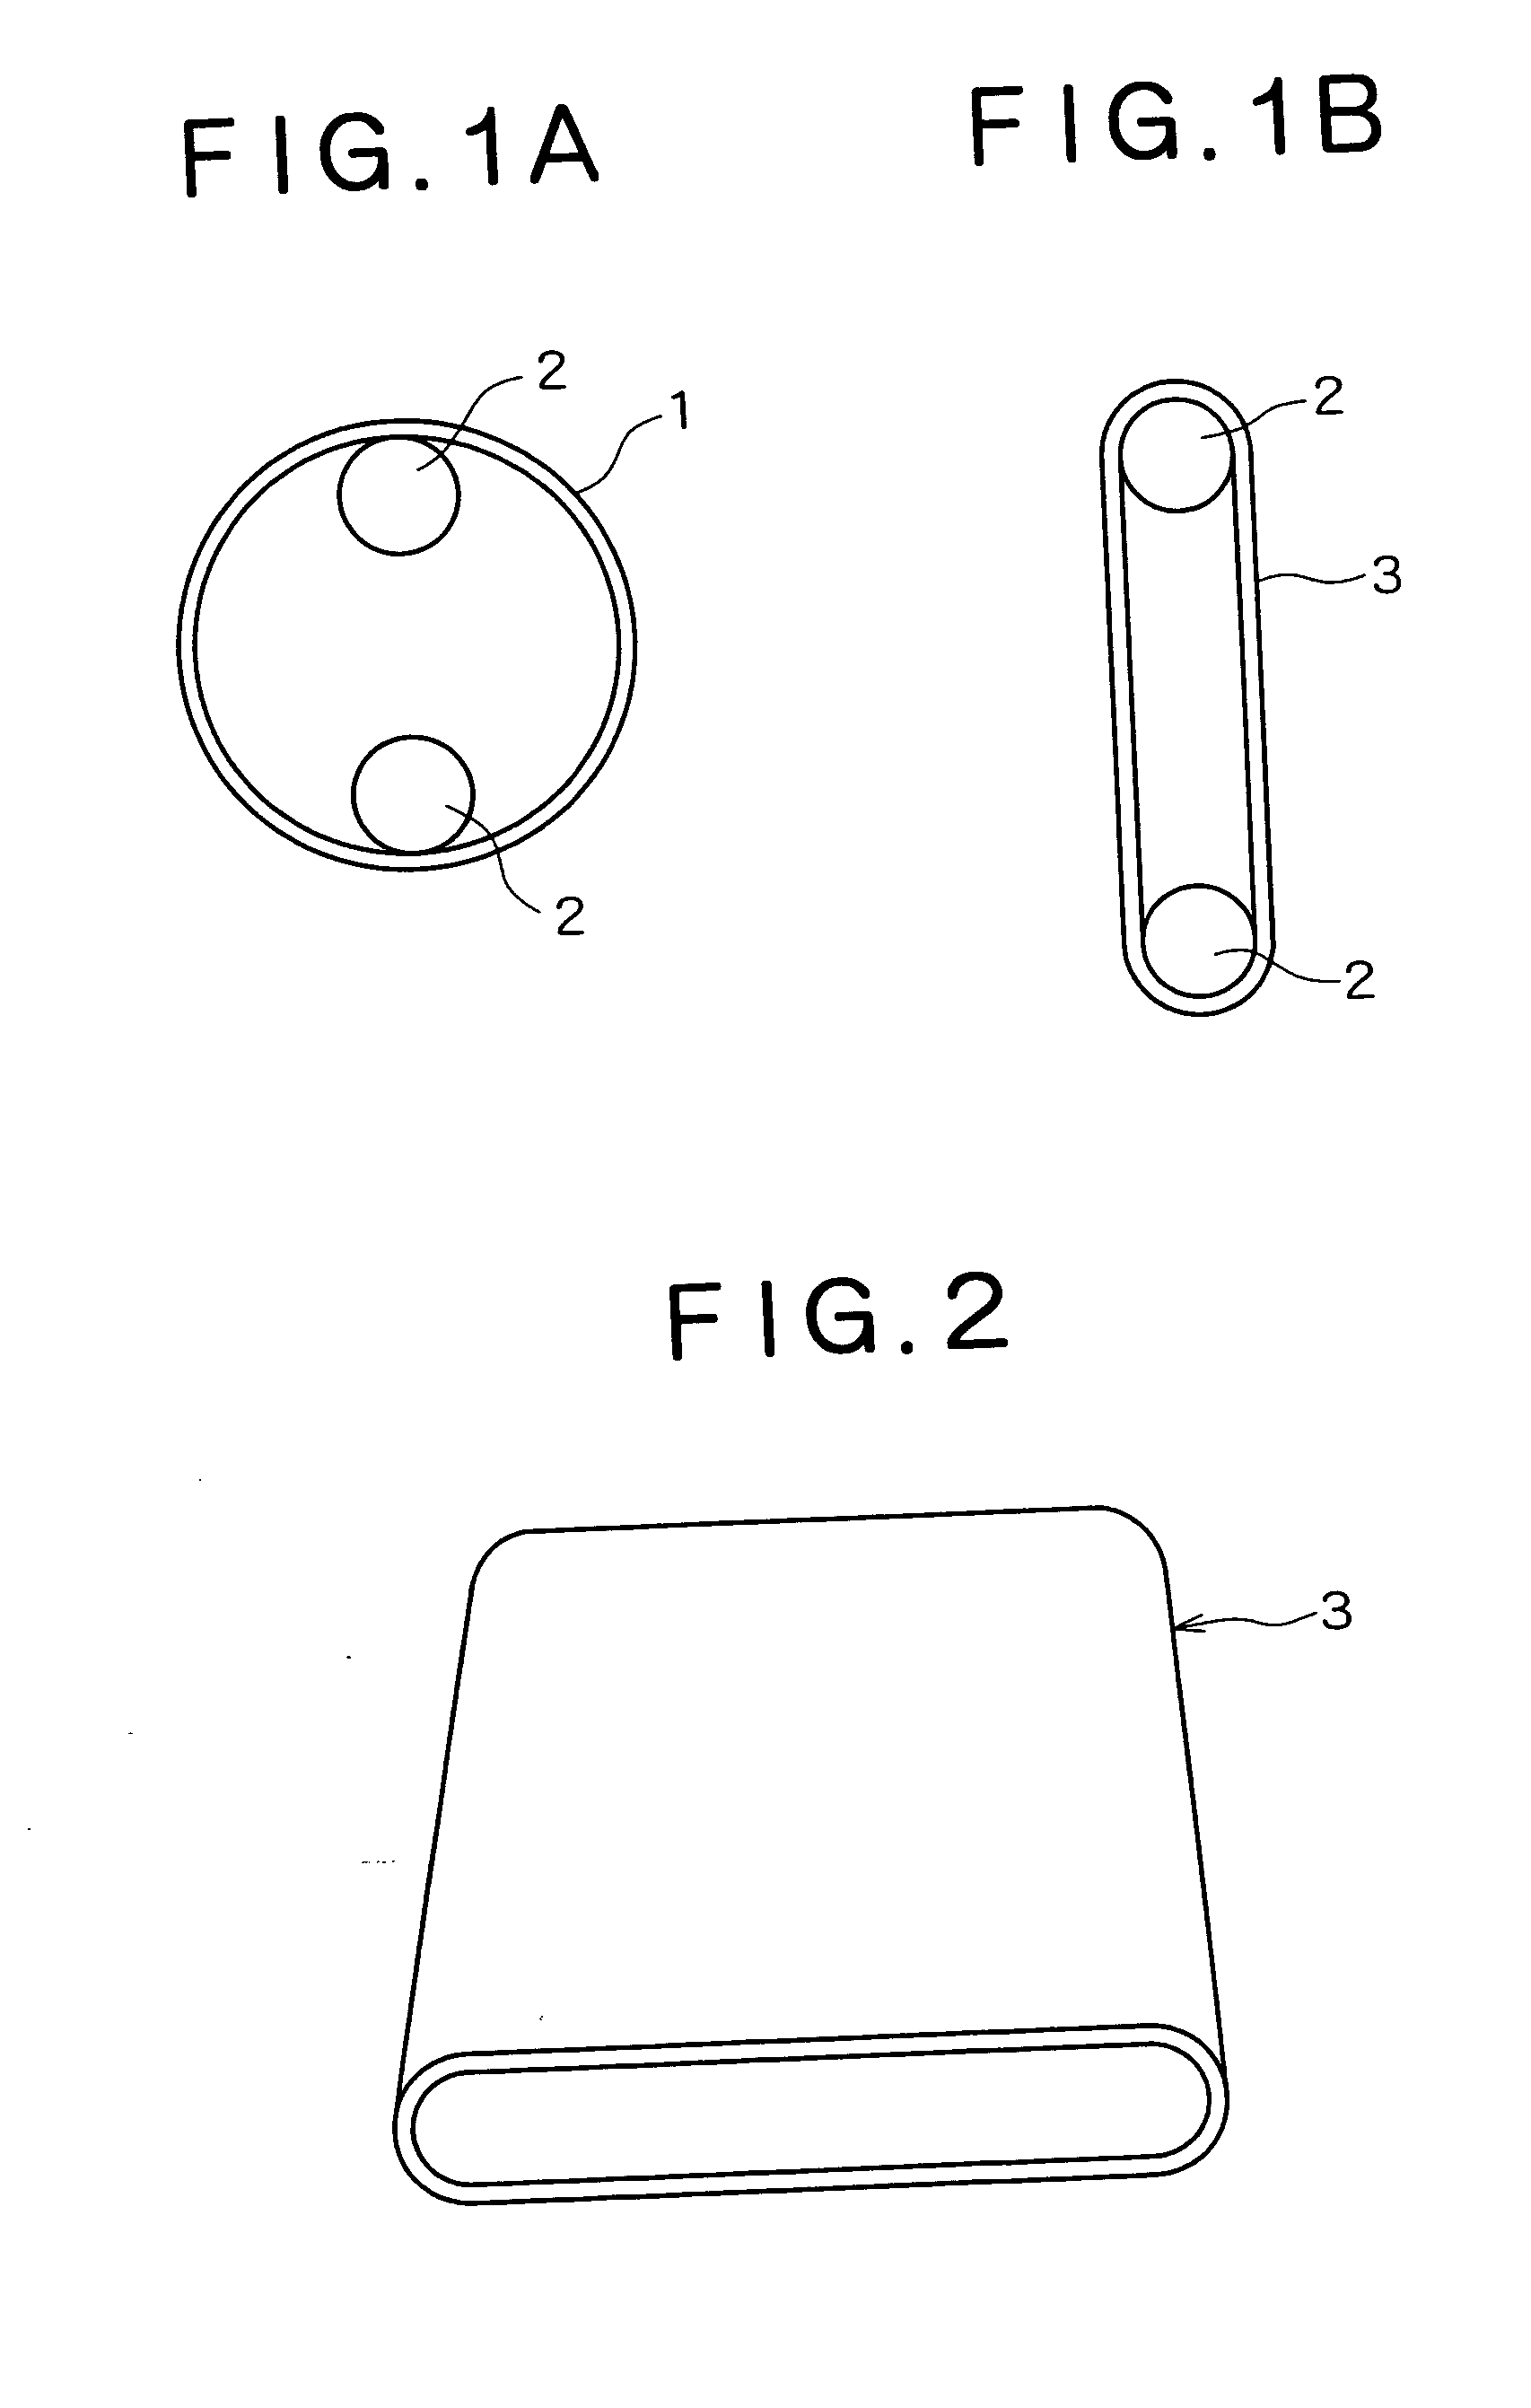 Glass-like carbon deformed molded article, process for producing the same, and joint structure for jointing a connecting member to a glass-like carbon hollow molded article